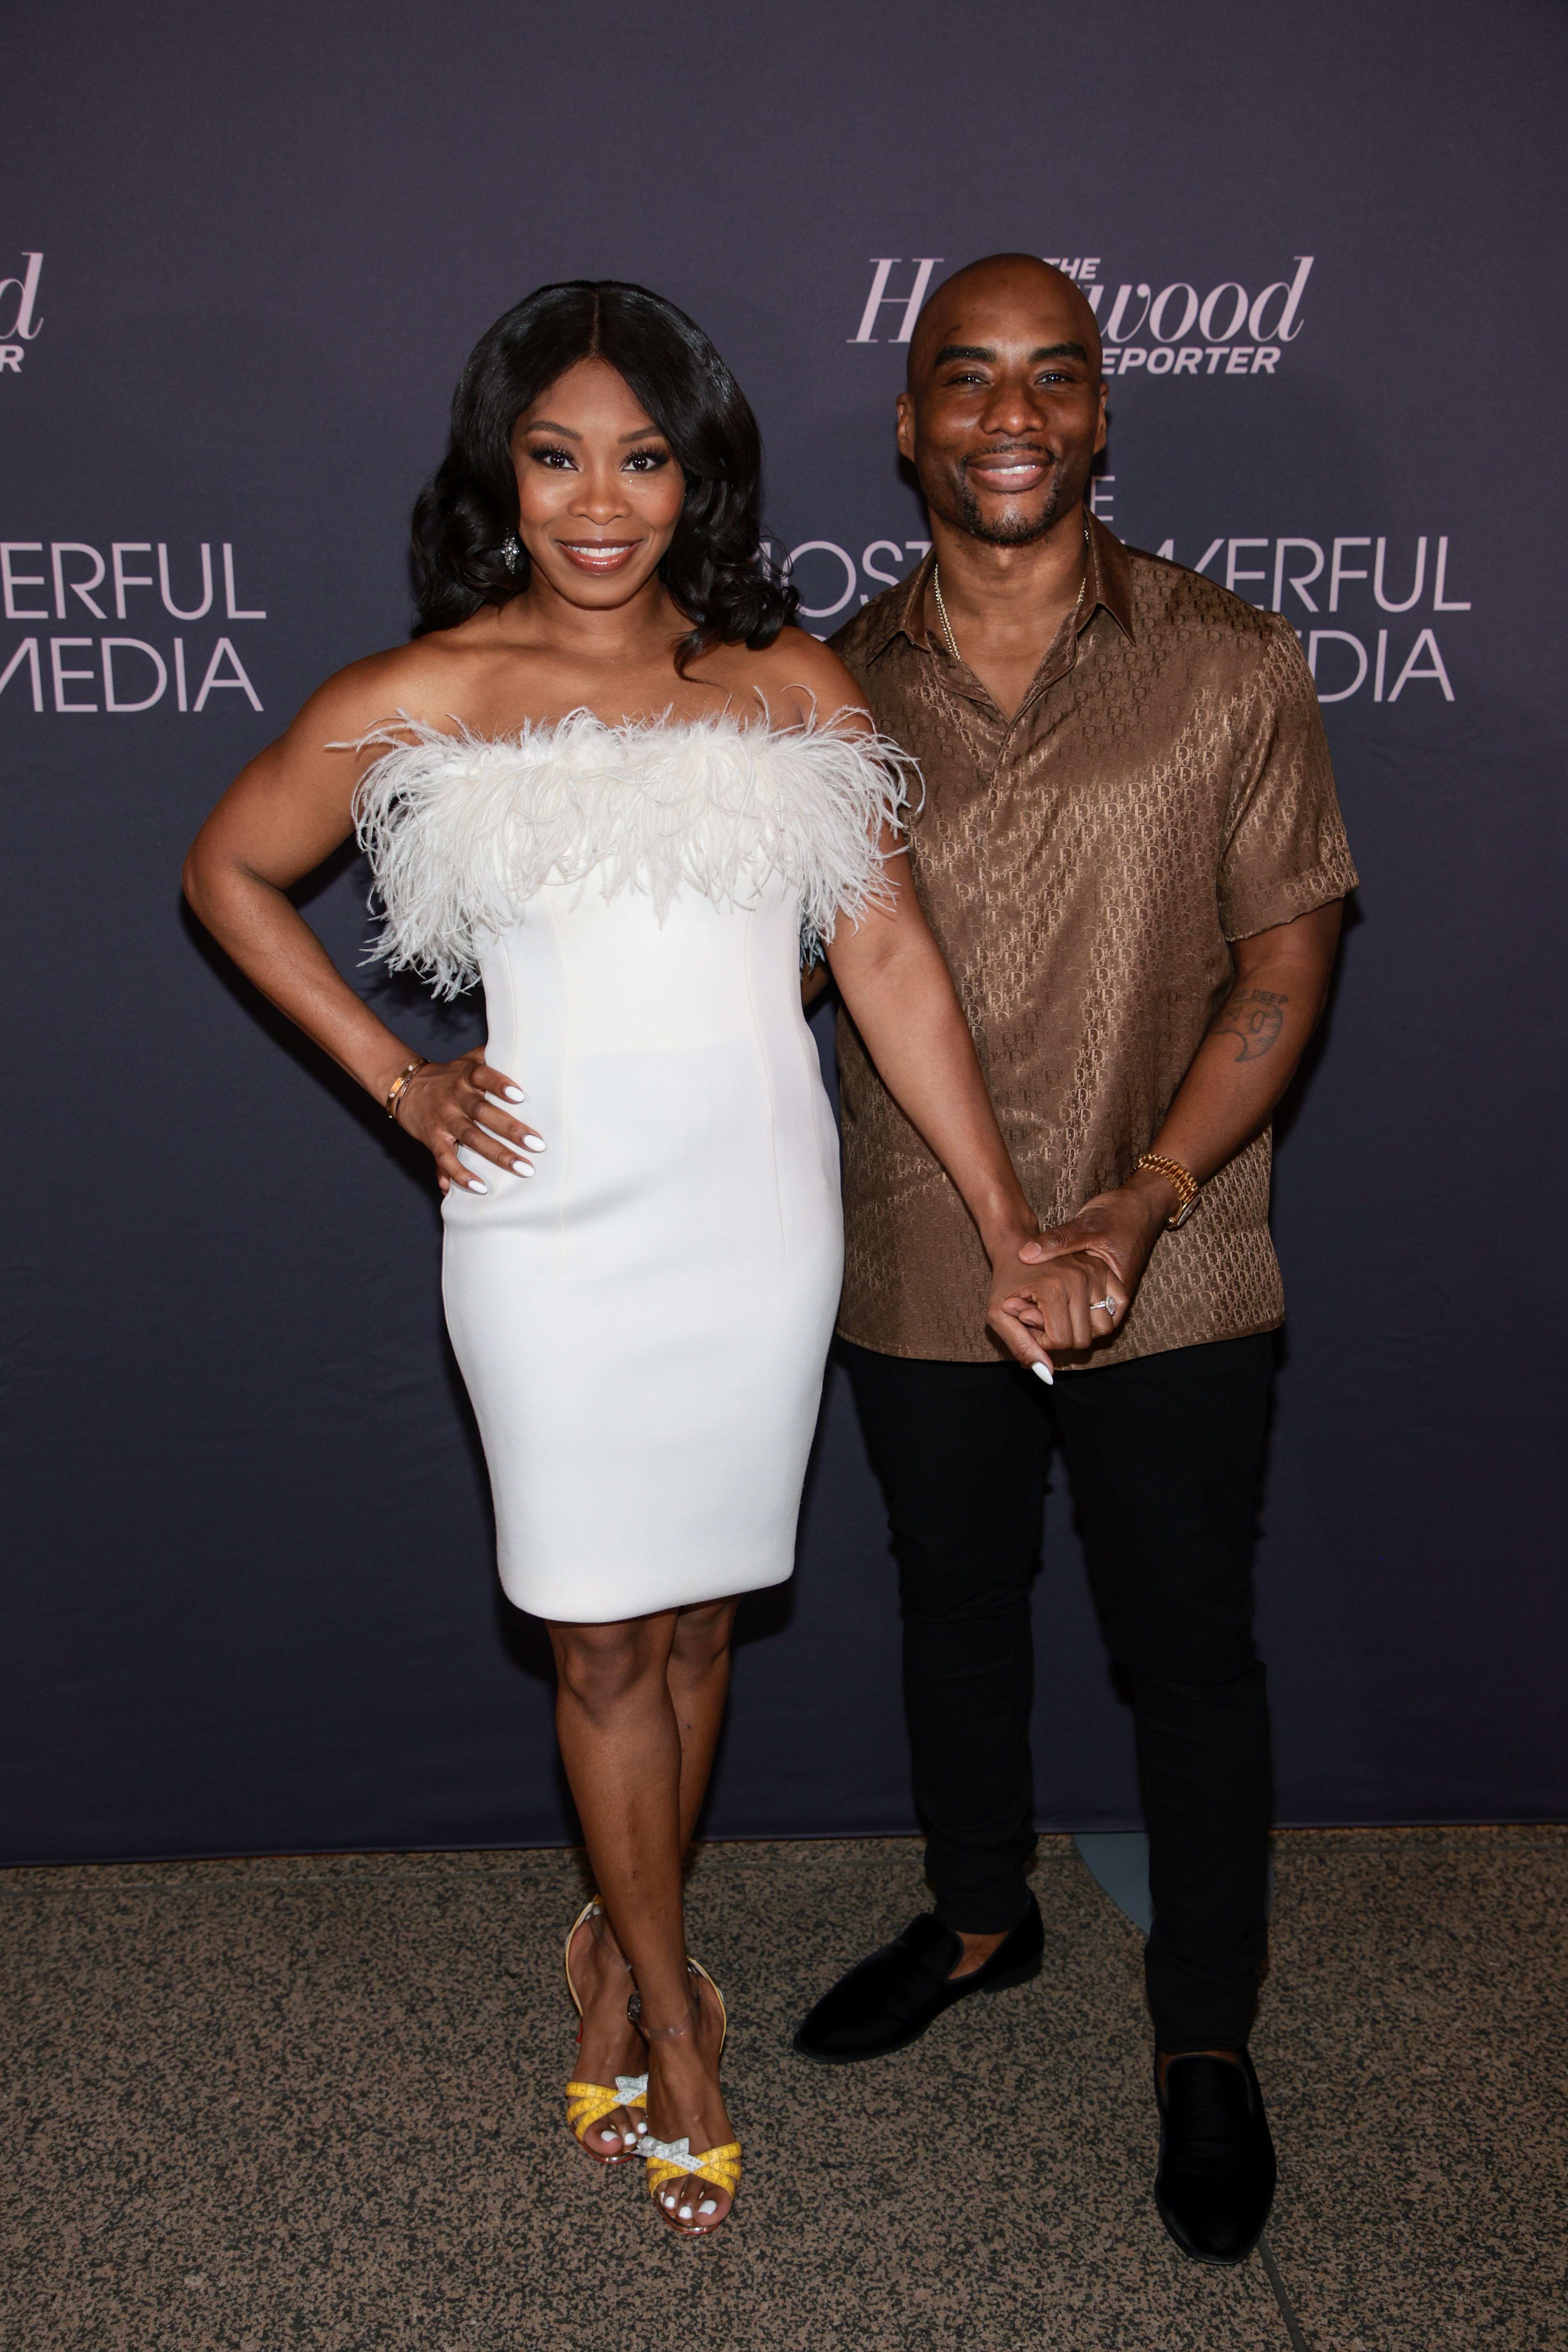 Jessica Gadsden and Charlamagne Tha God at “The Hollywood Reporter Most Powerful People In Media” on May 17, 2022, in New York. | Source: Getty Images